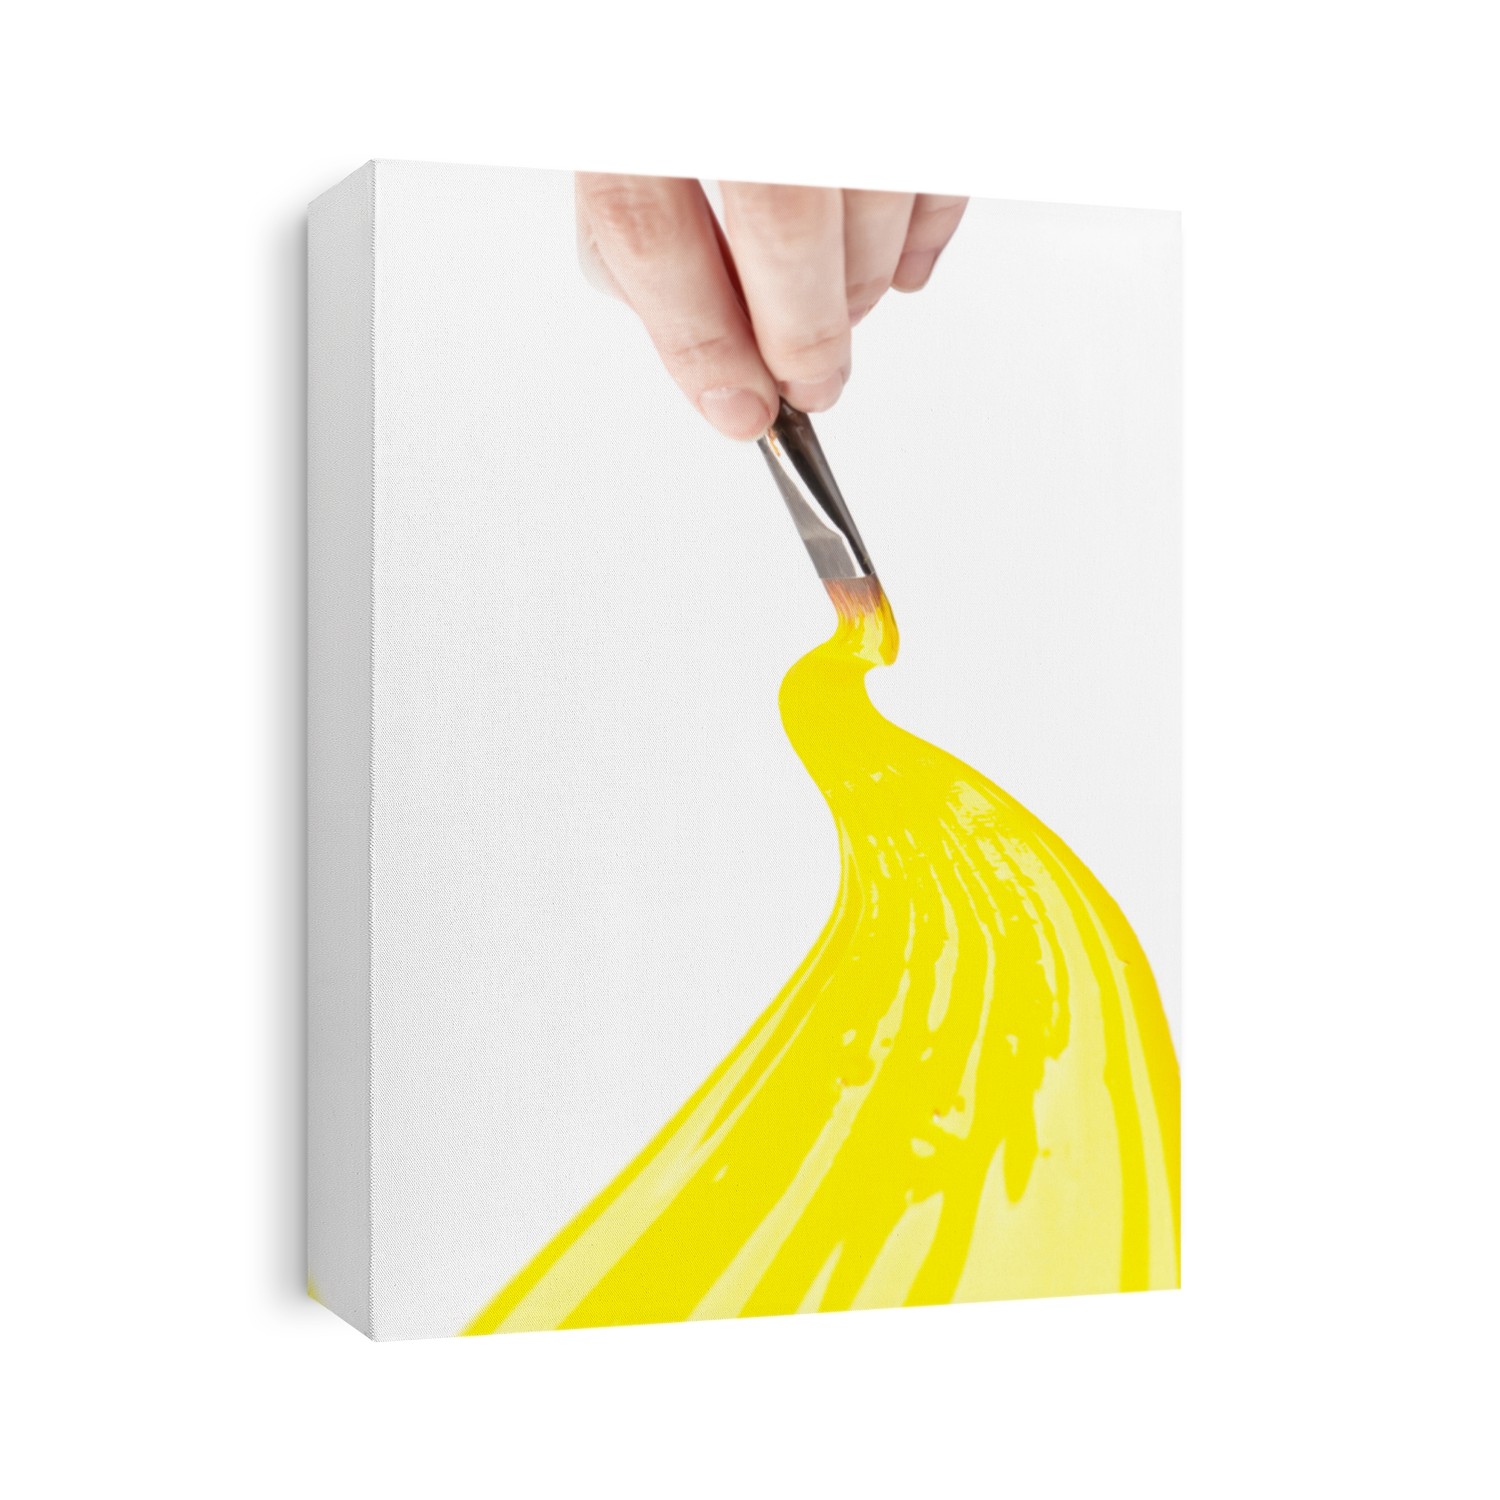 Hand draws yellow curve line on white, isolated